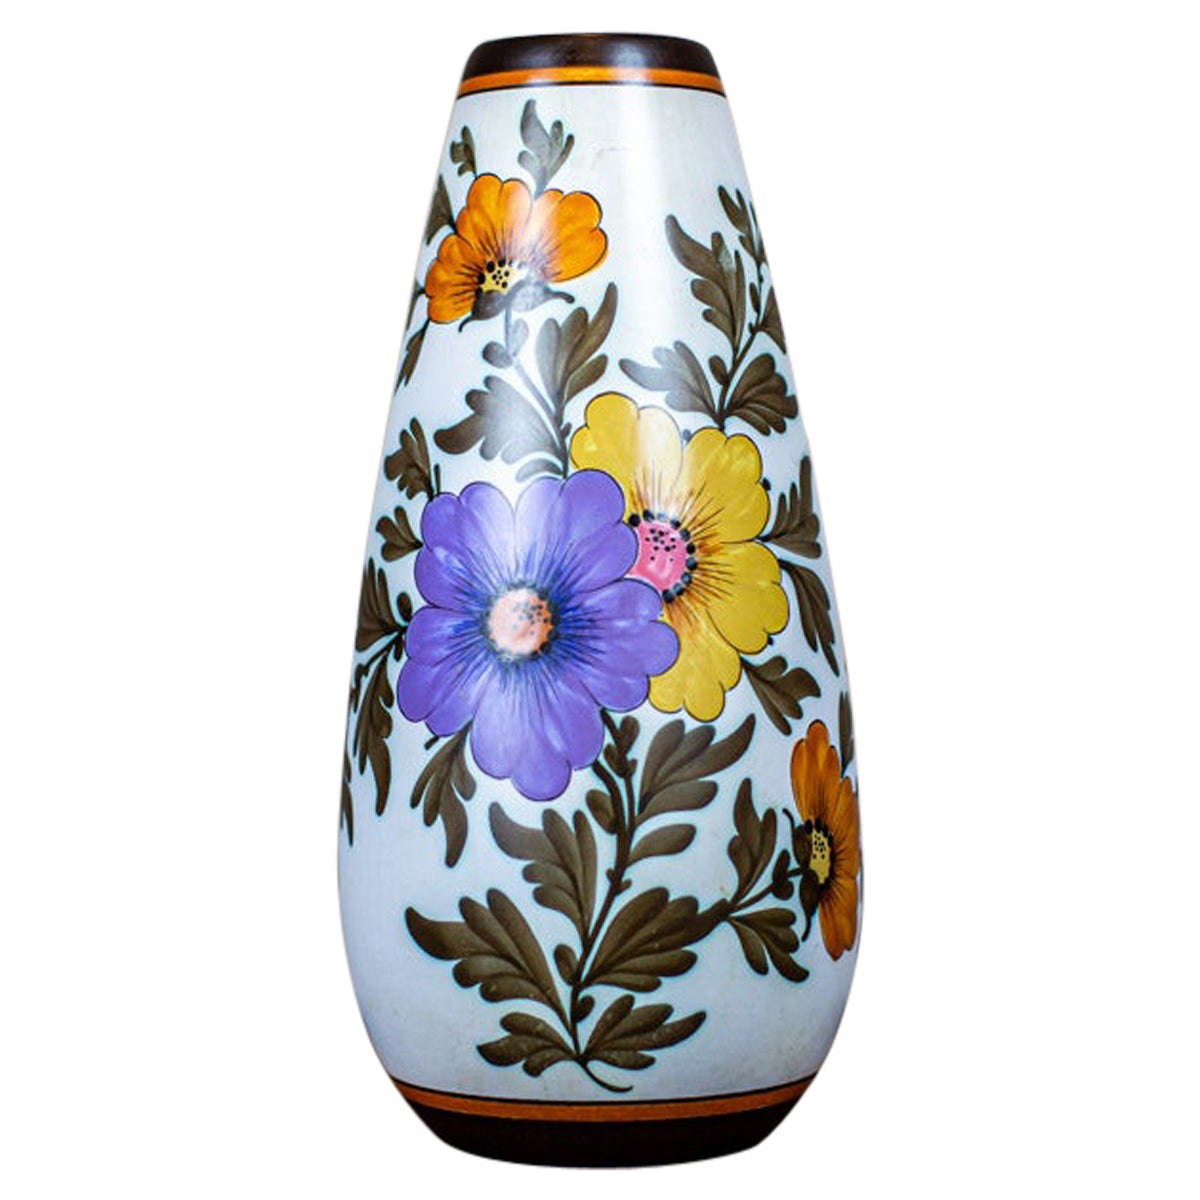 Ceramic Vase from the Early 20th Century in Floral Motifs